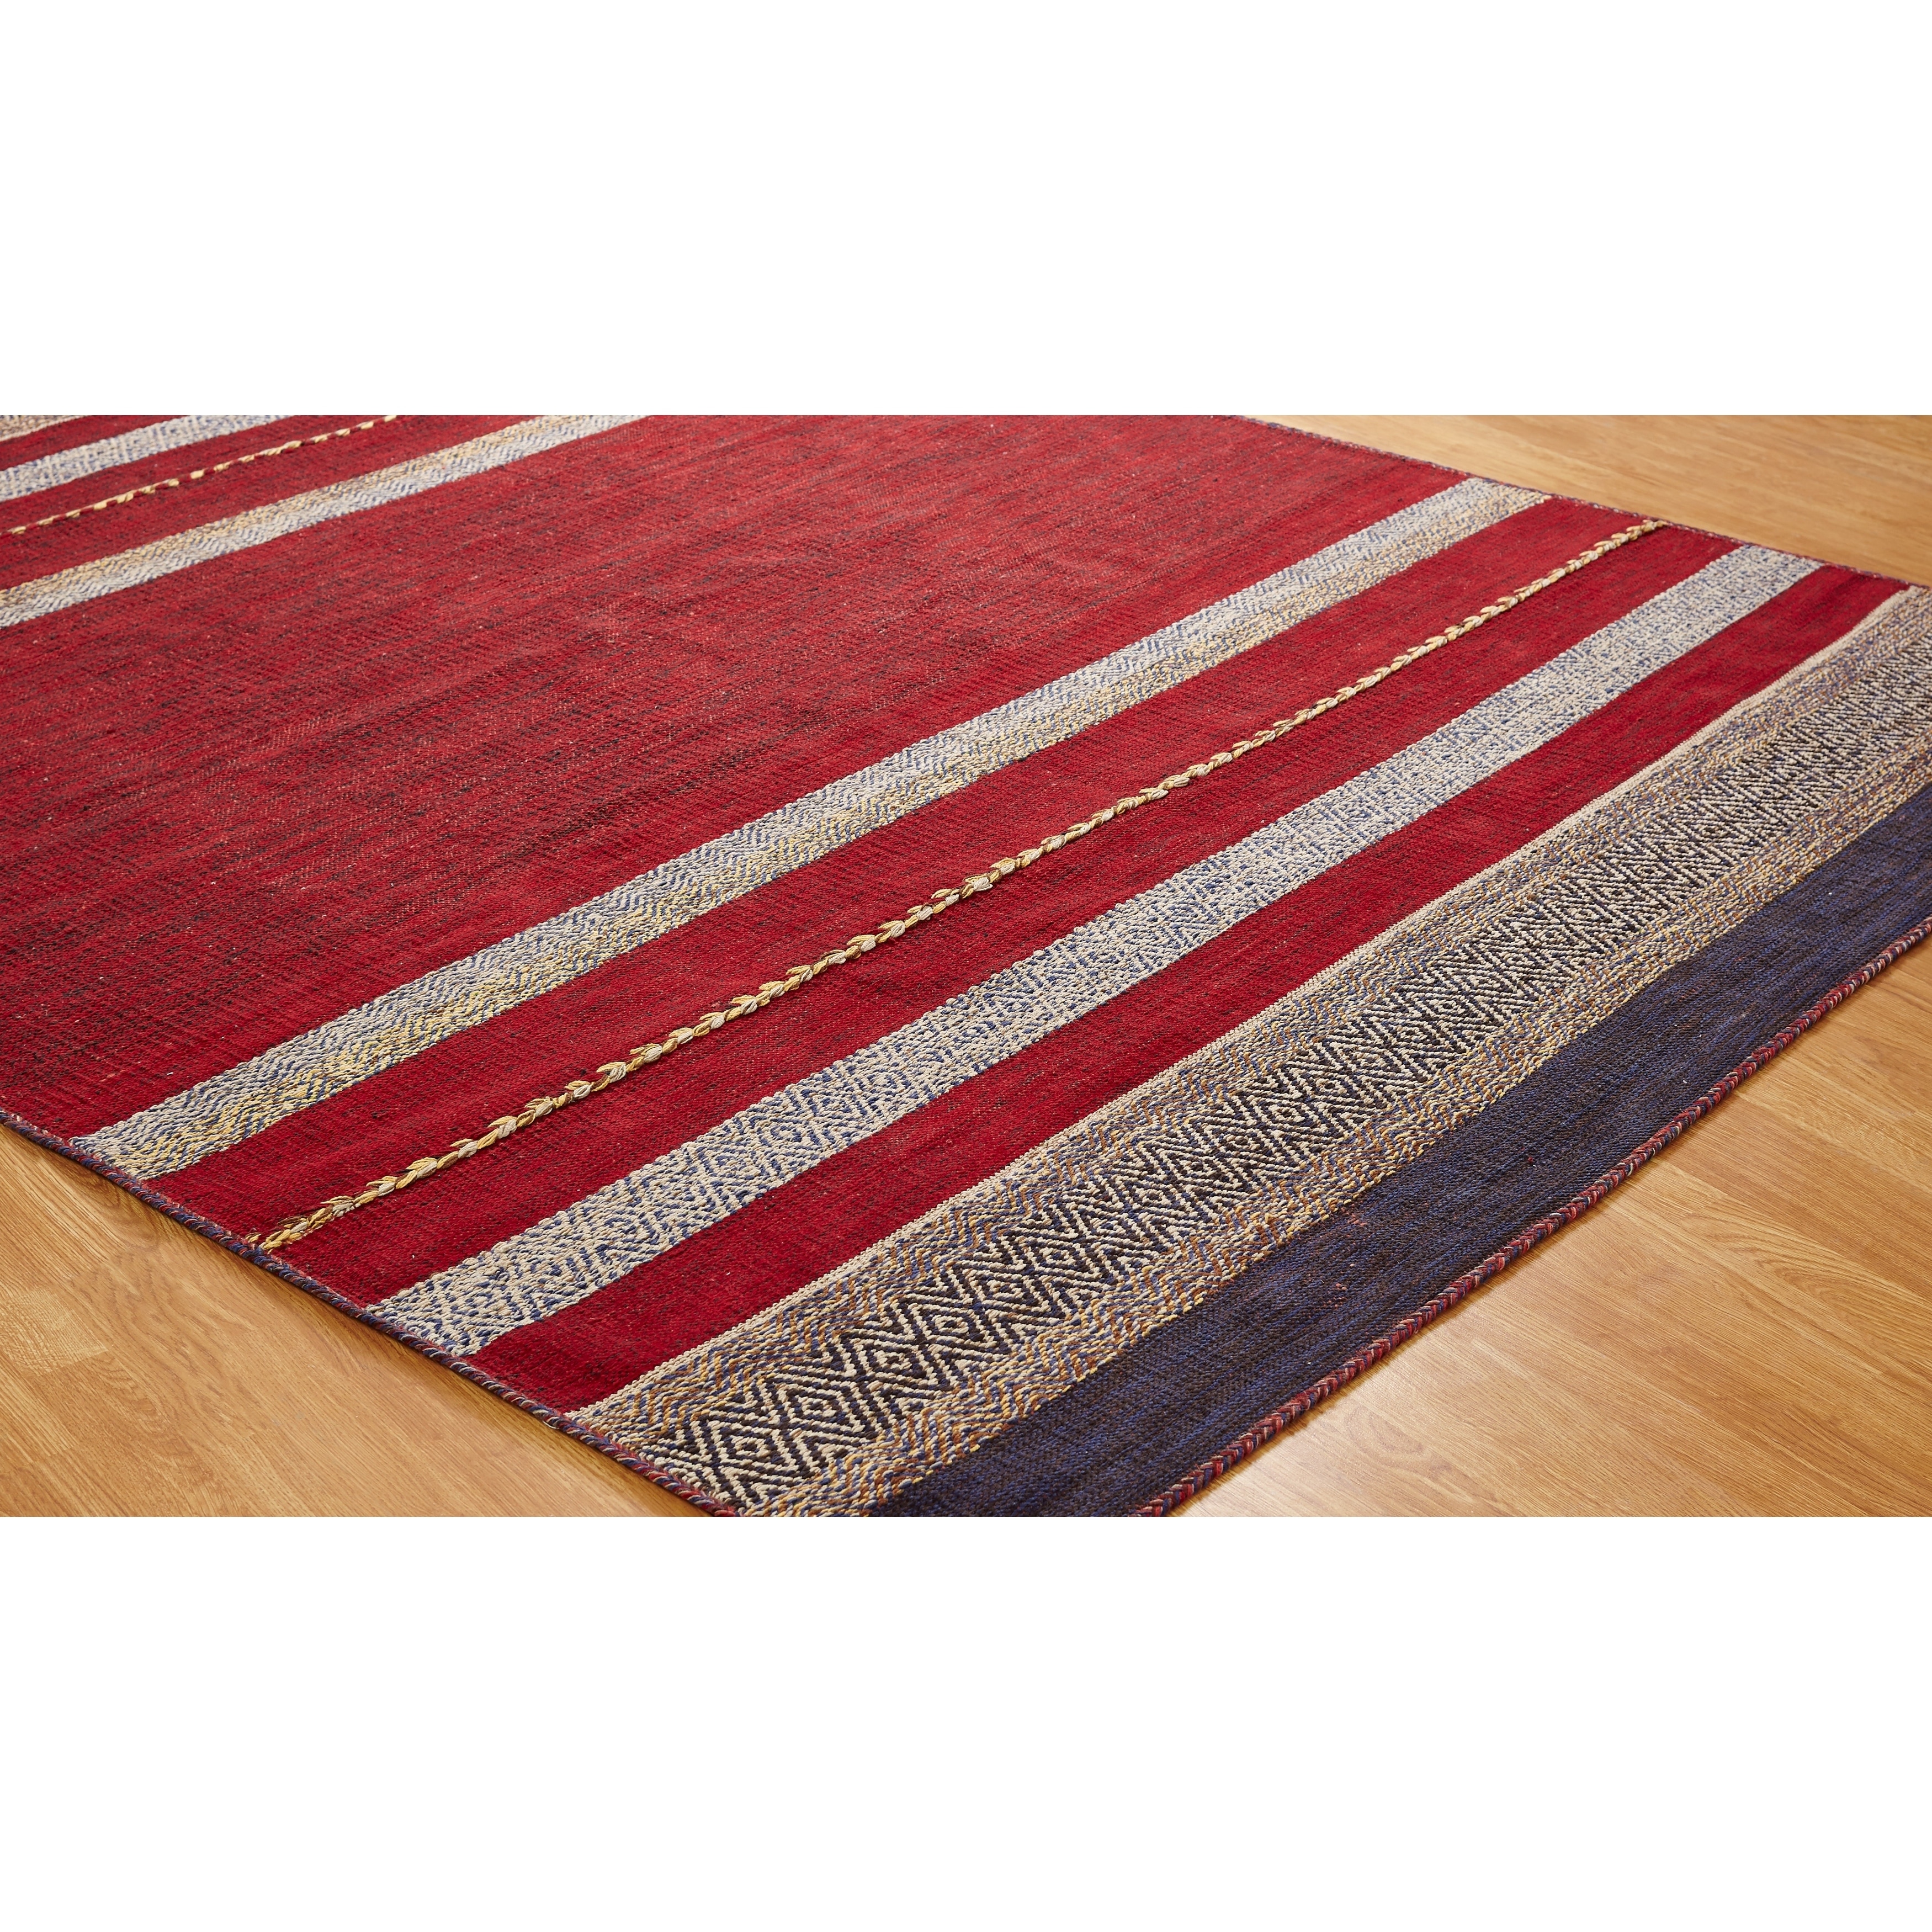 Kelim striped rugs hand woven cotton chenille made in india colour red on sale 